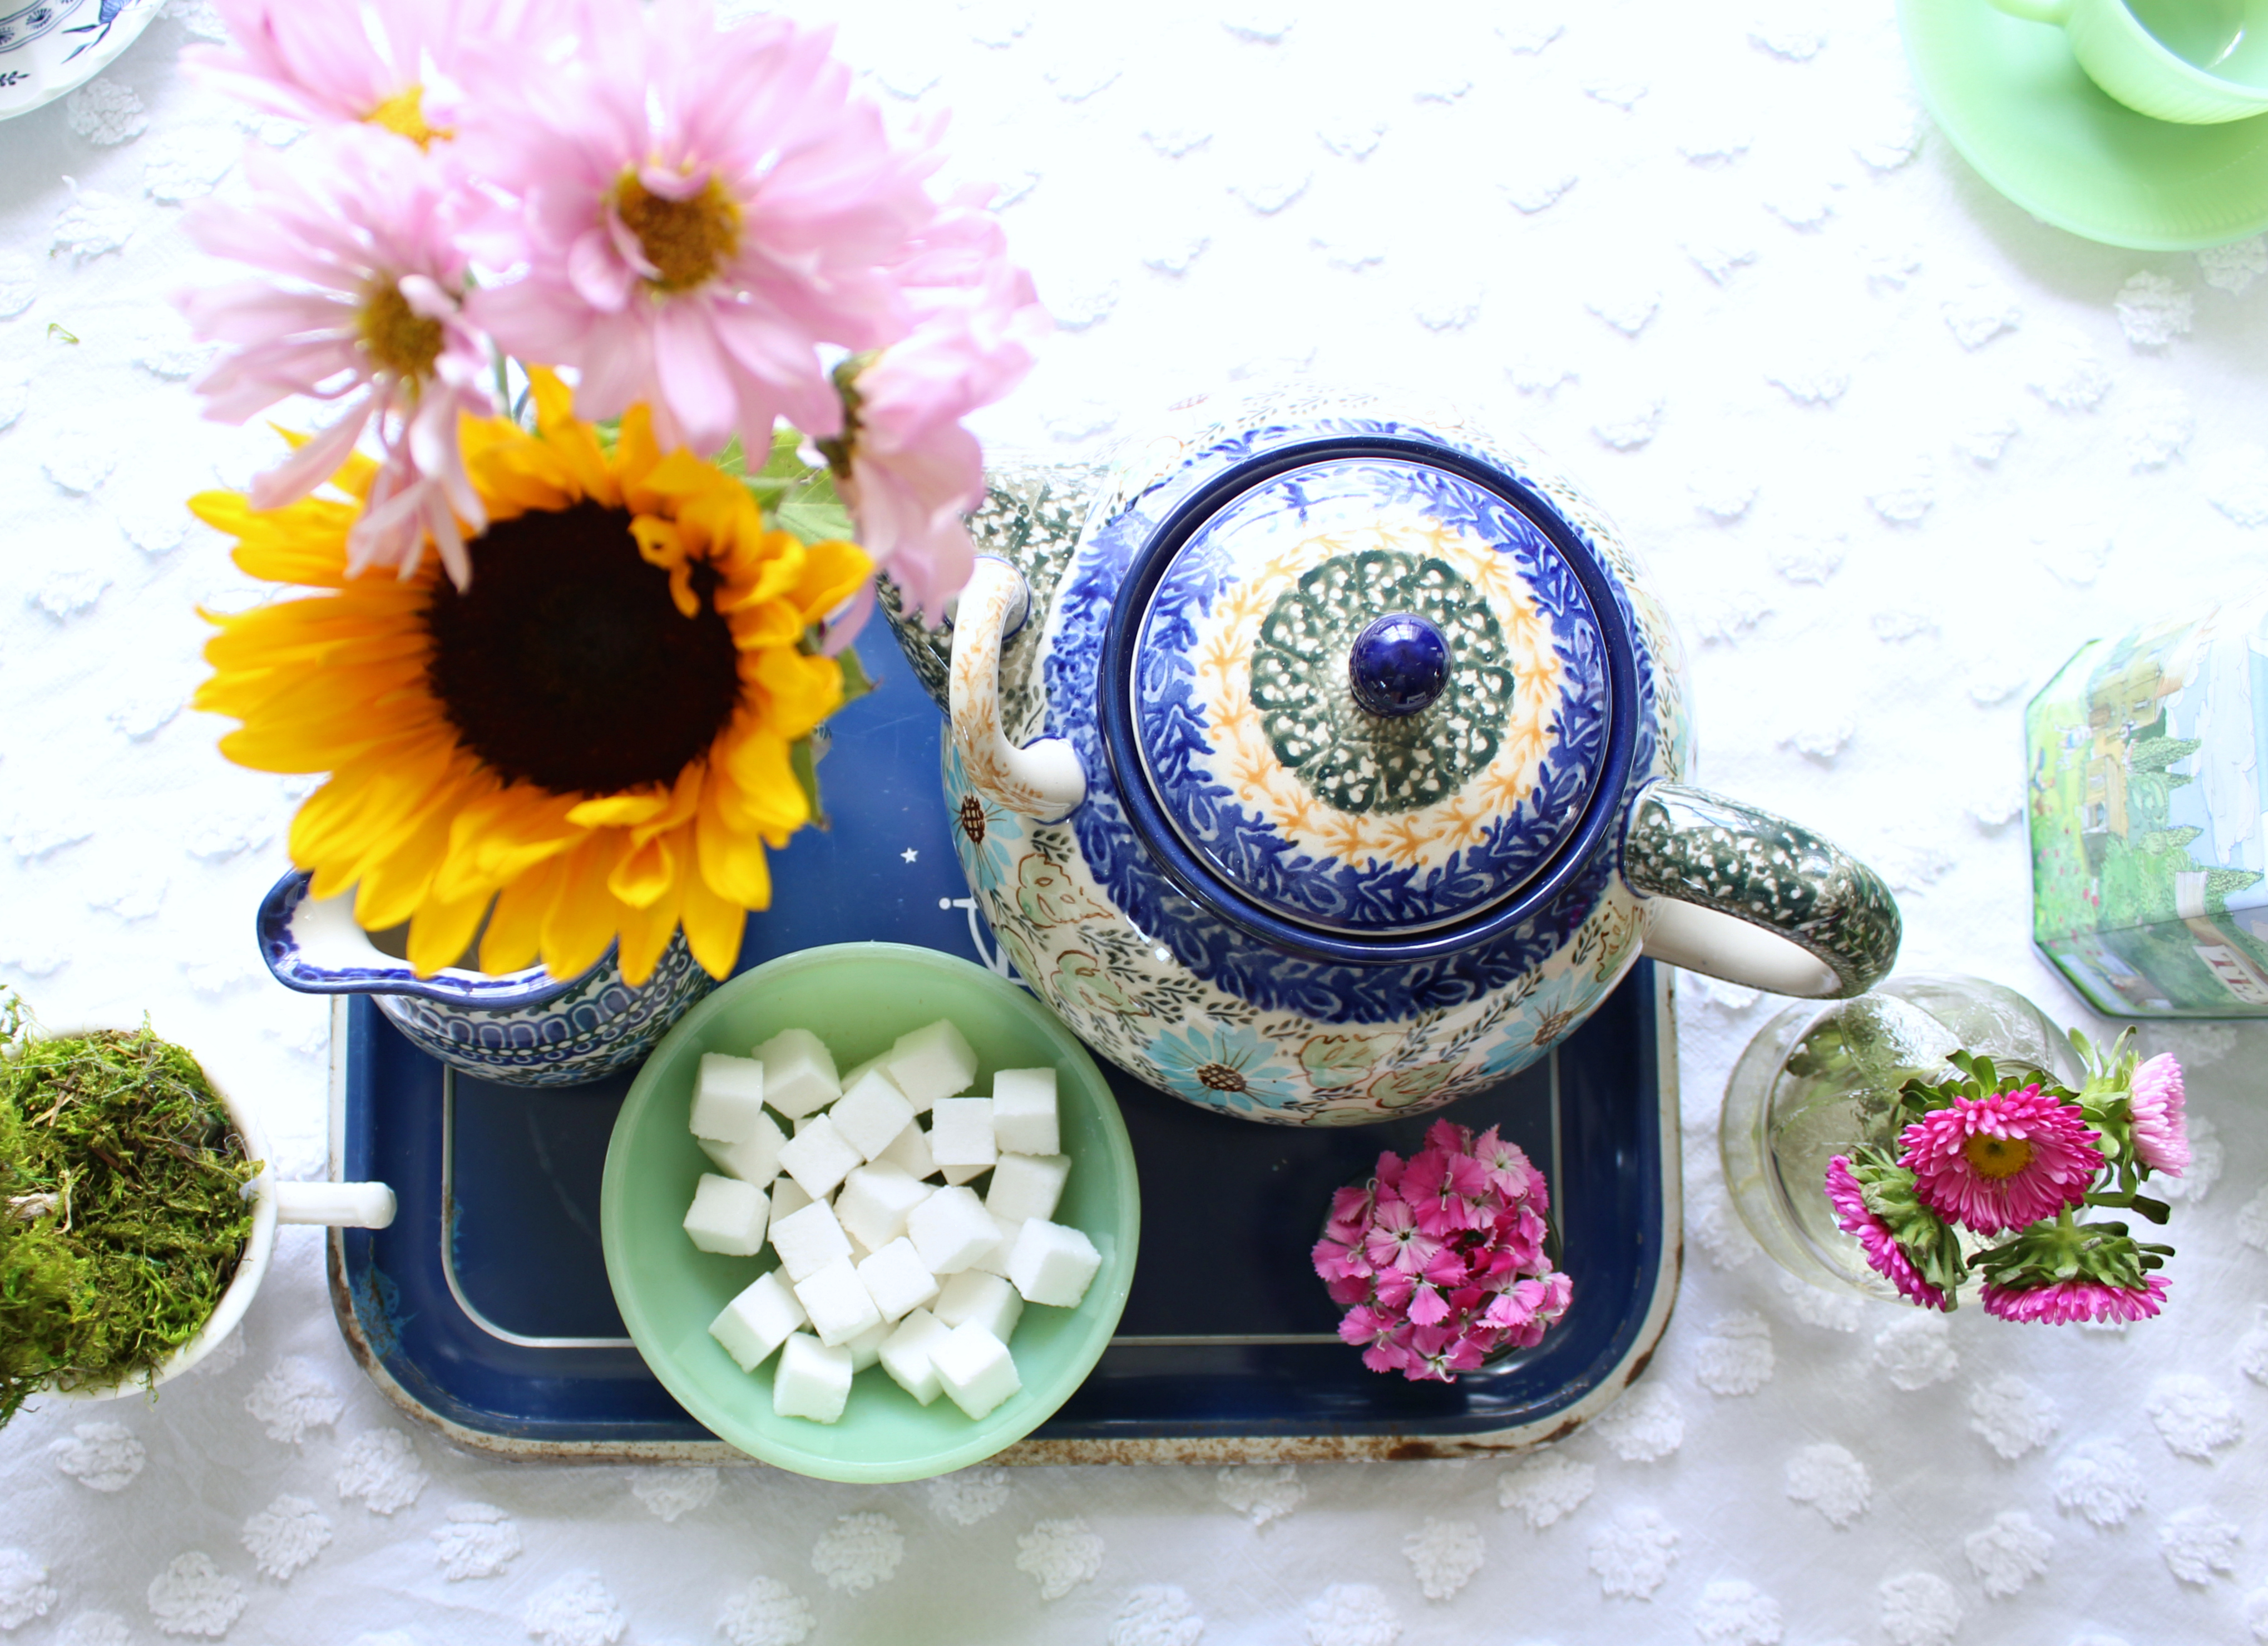 Mixing colors and pattenrs makes for a fun Spring tea party!